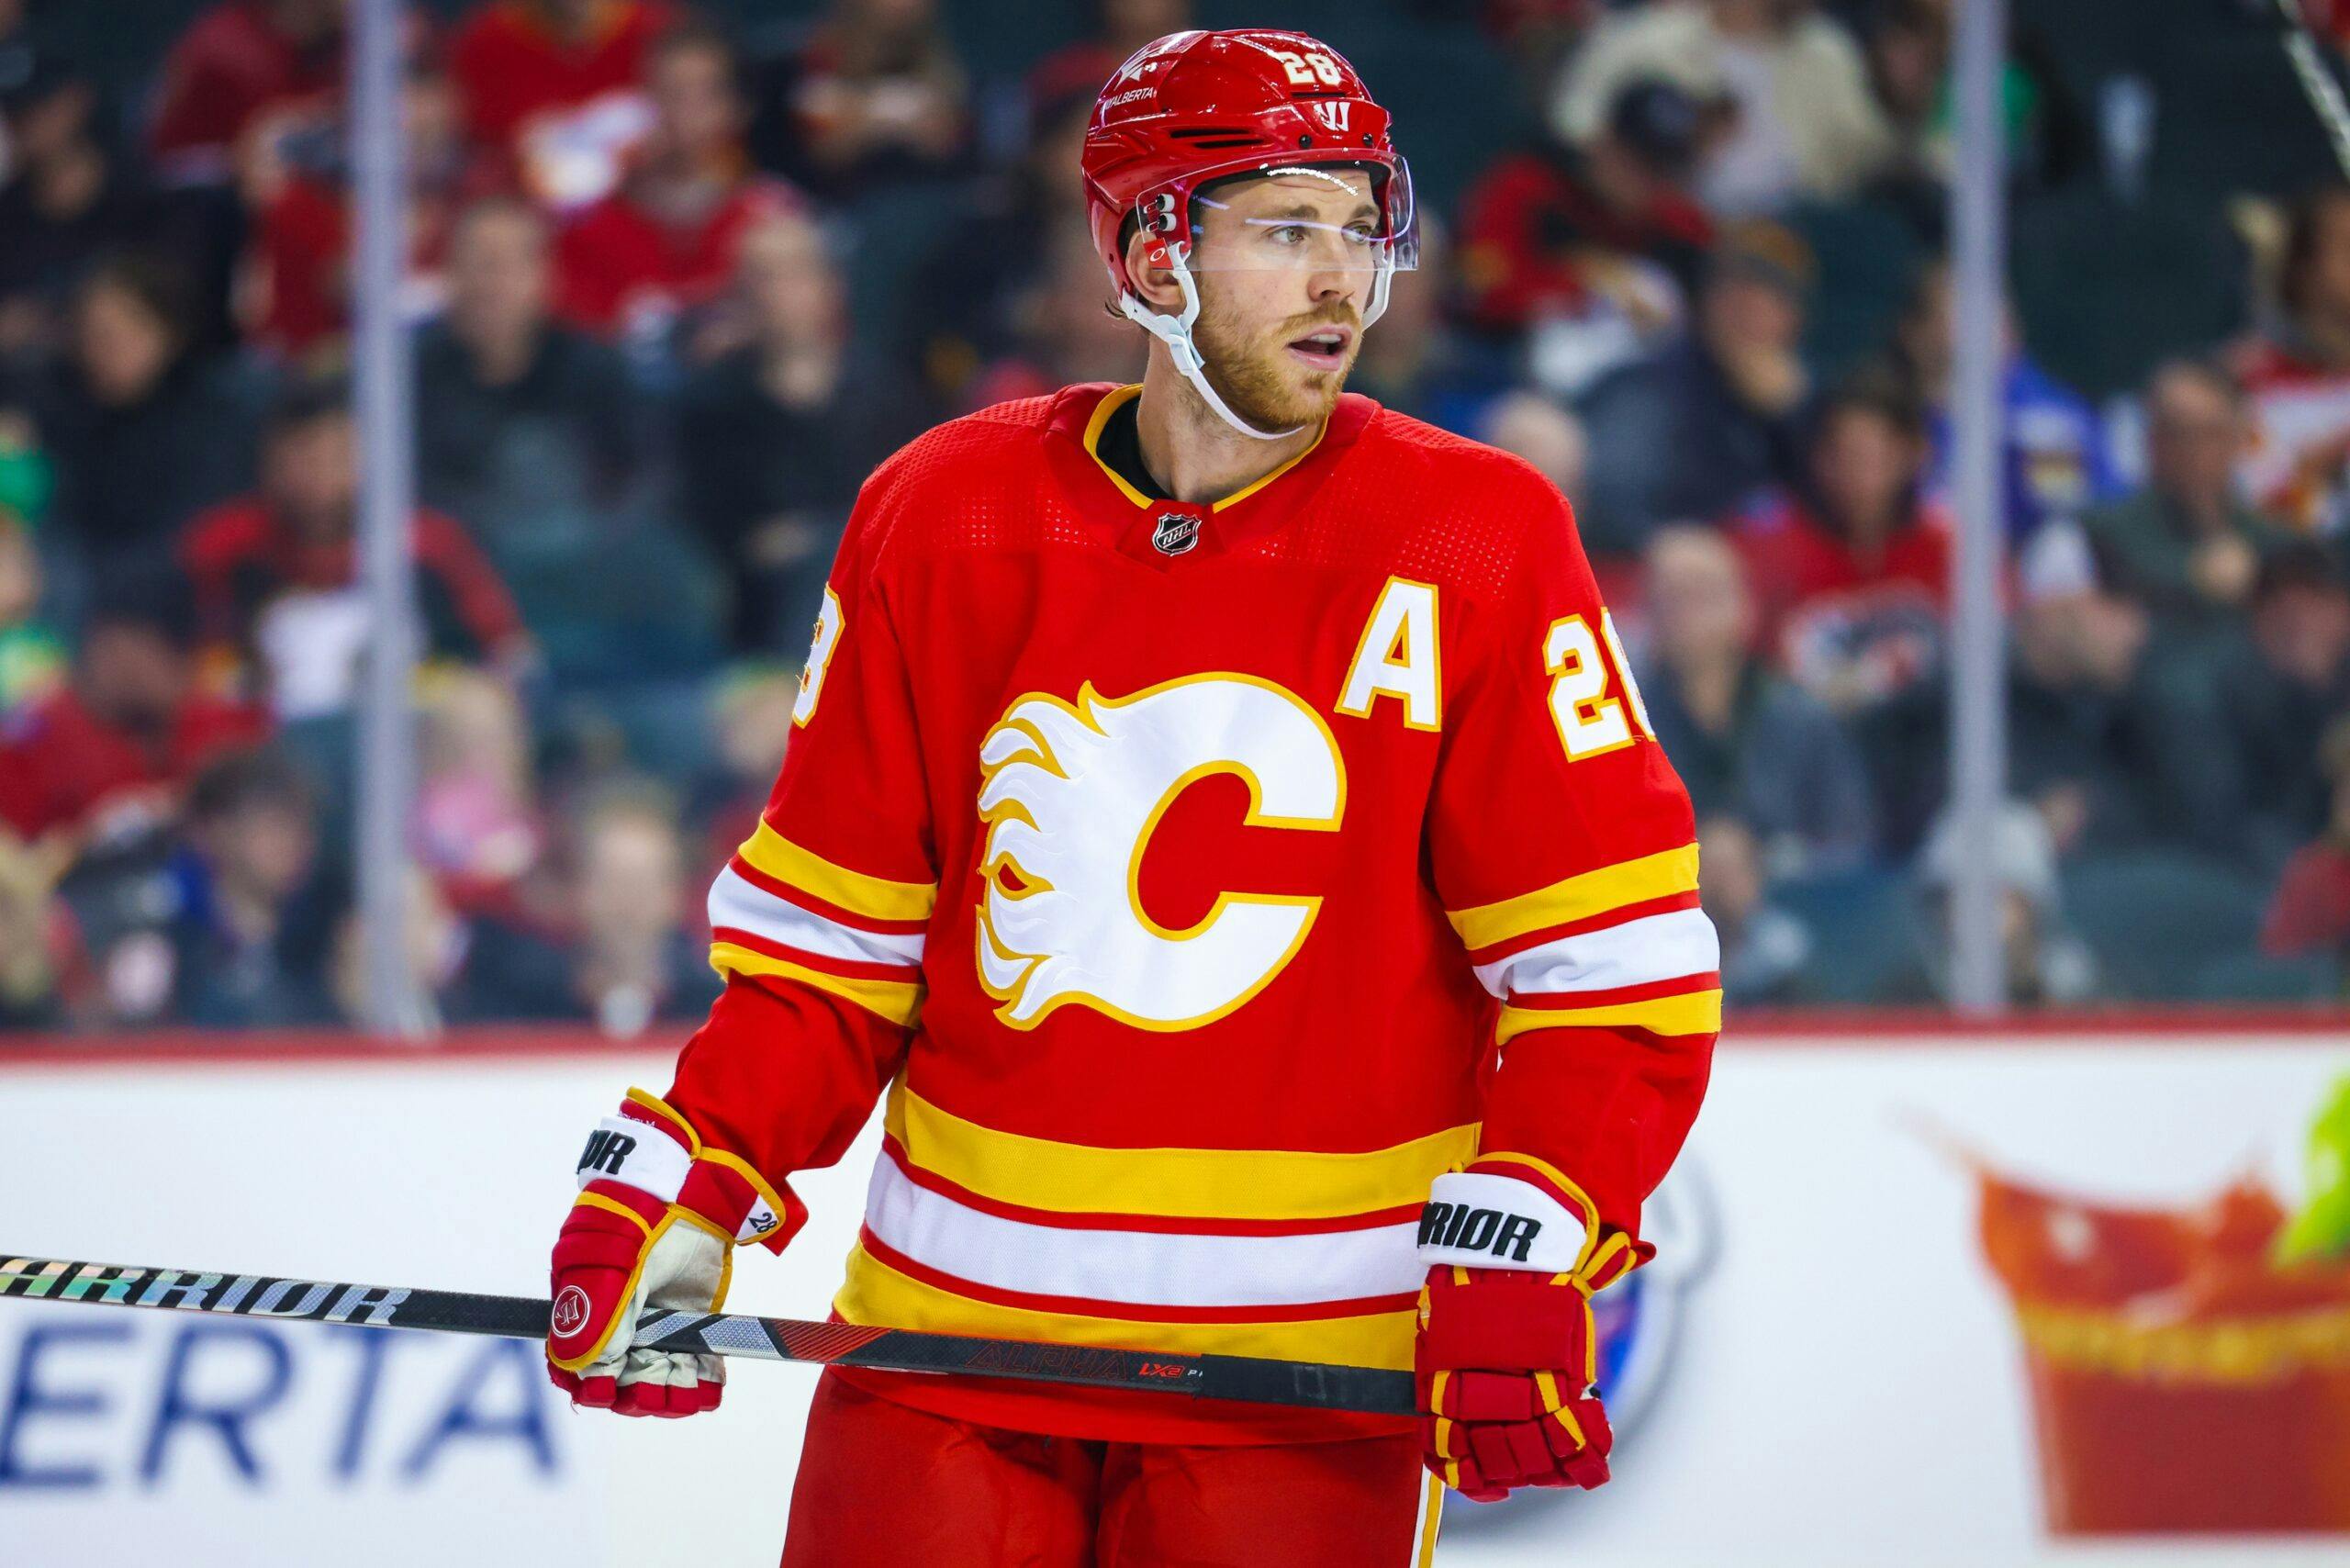 Grading the Elias Lindholm trade: Canucks nab ideal 2C, Flames add significant assets - Daily Faceoff